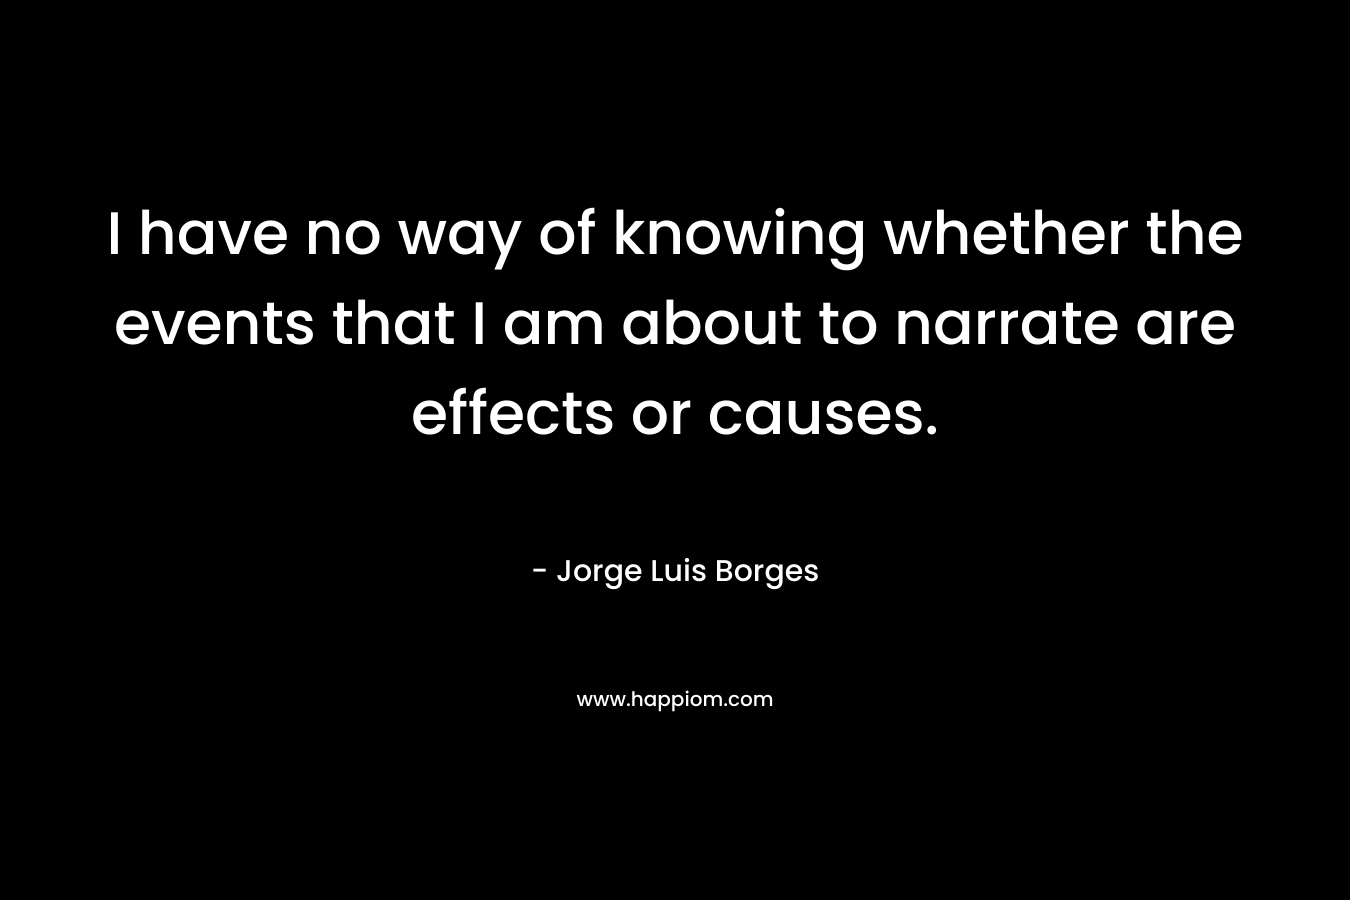 I have no way of knowing whether the events that I am about to narrate are effects or causes. – Jorge Luis Borges